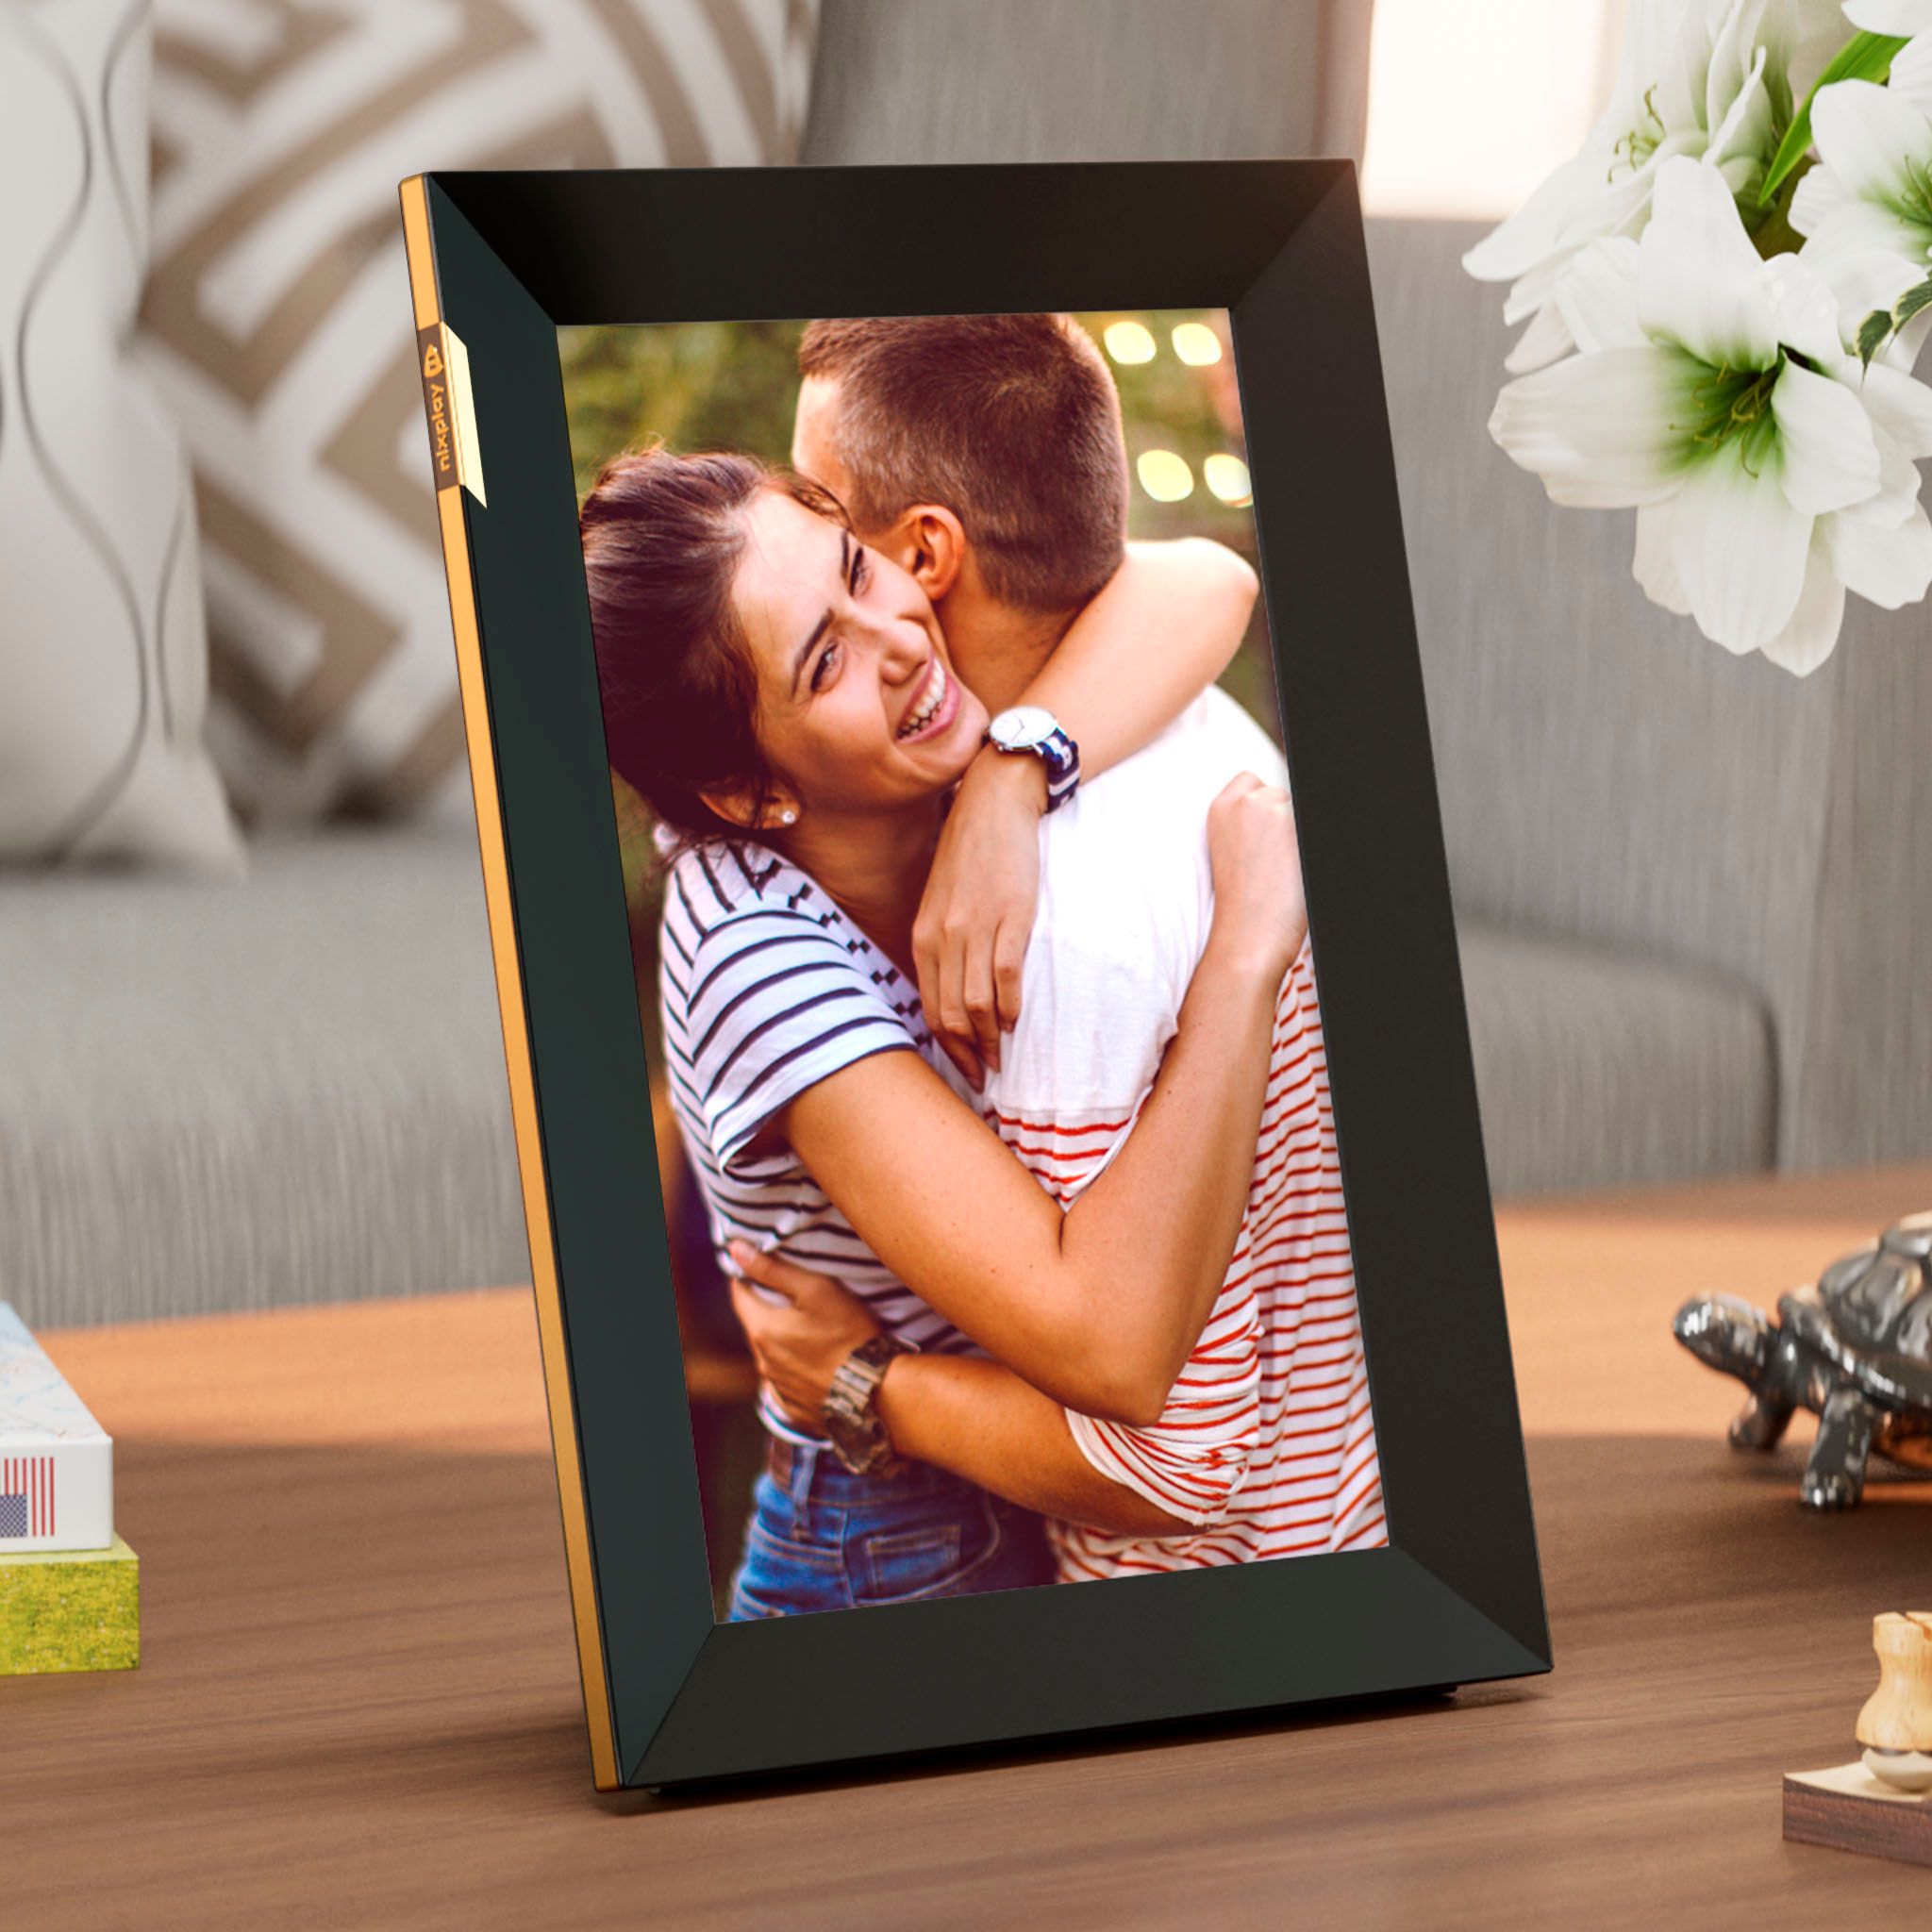 Left View: Nixplay - W10K Touch 10.1-inch LCD Smart Digital Photo Frame - Black/Gold